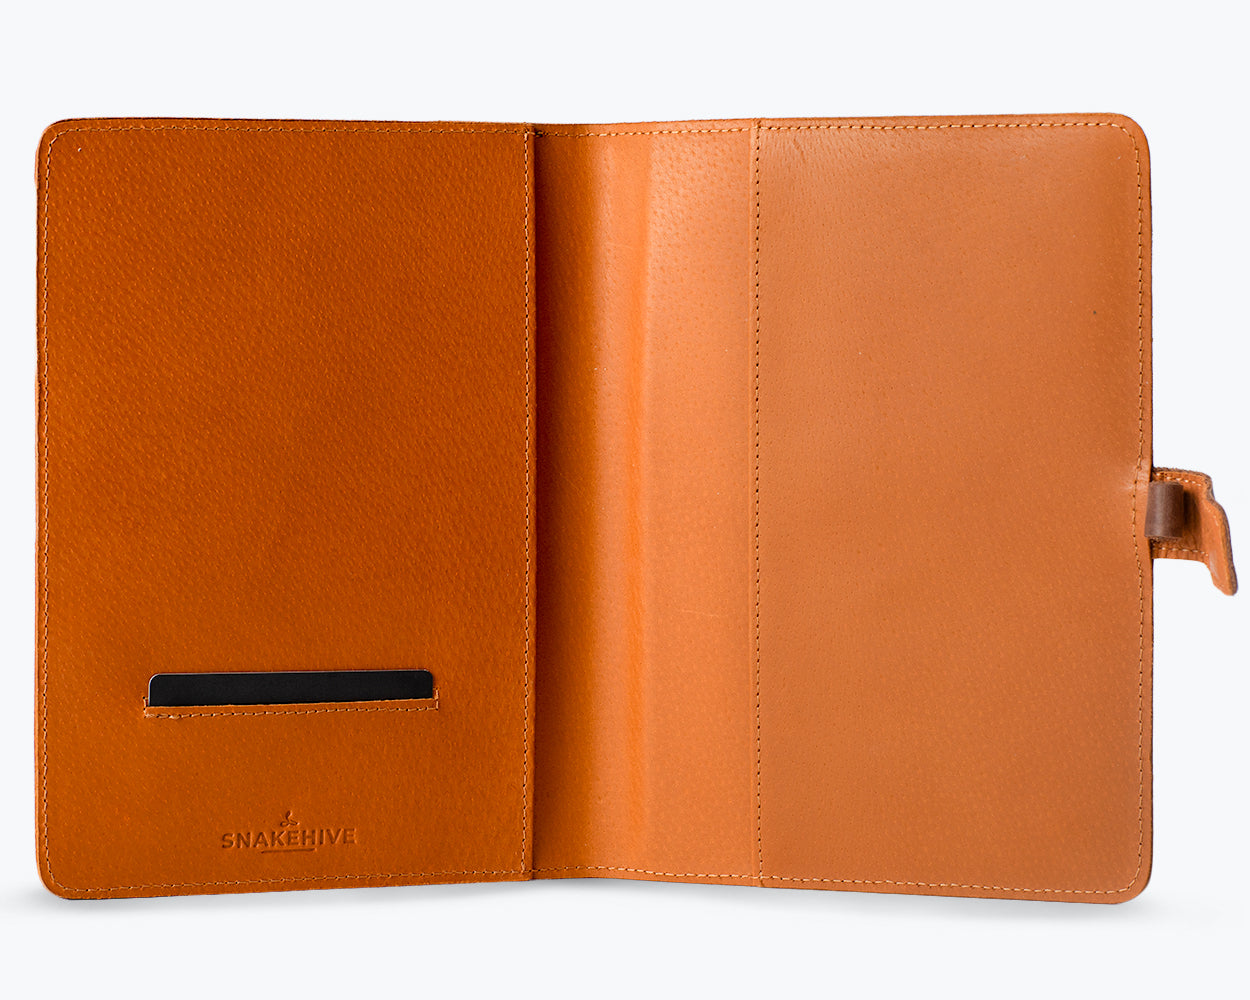 Vintage A5 Leather Notebook Cover (With Notebook Included)